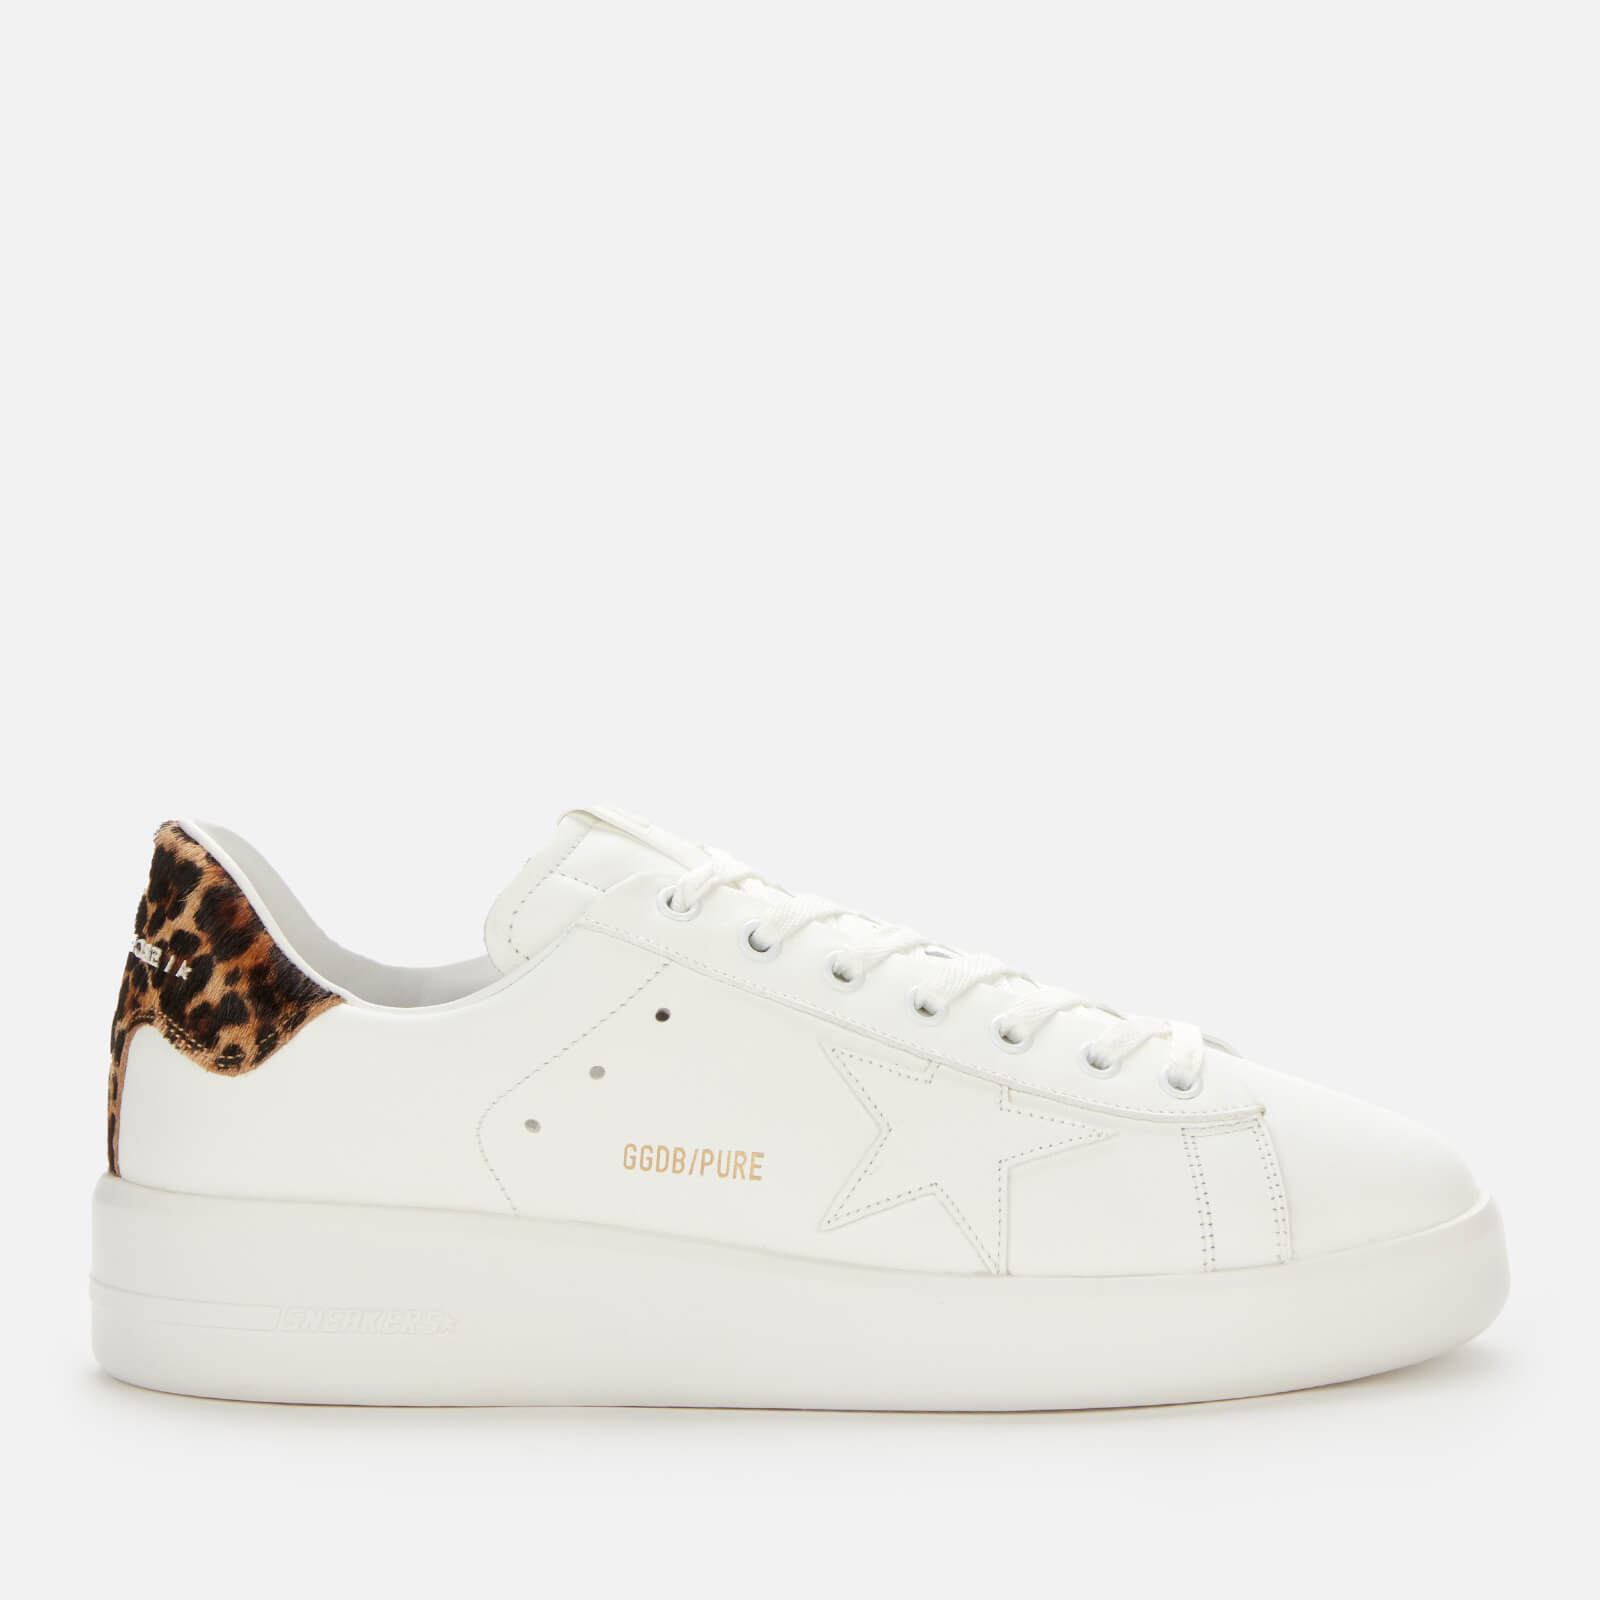 Golden Goose Deluxe Brand Men's Pure Star Chunky Leather Trainers - White/Leopard - UK 8